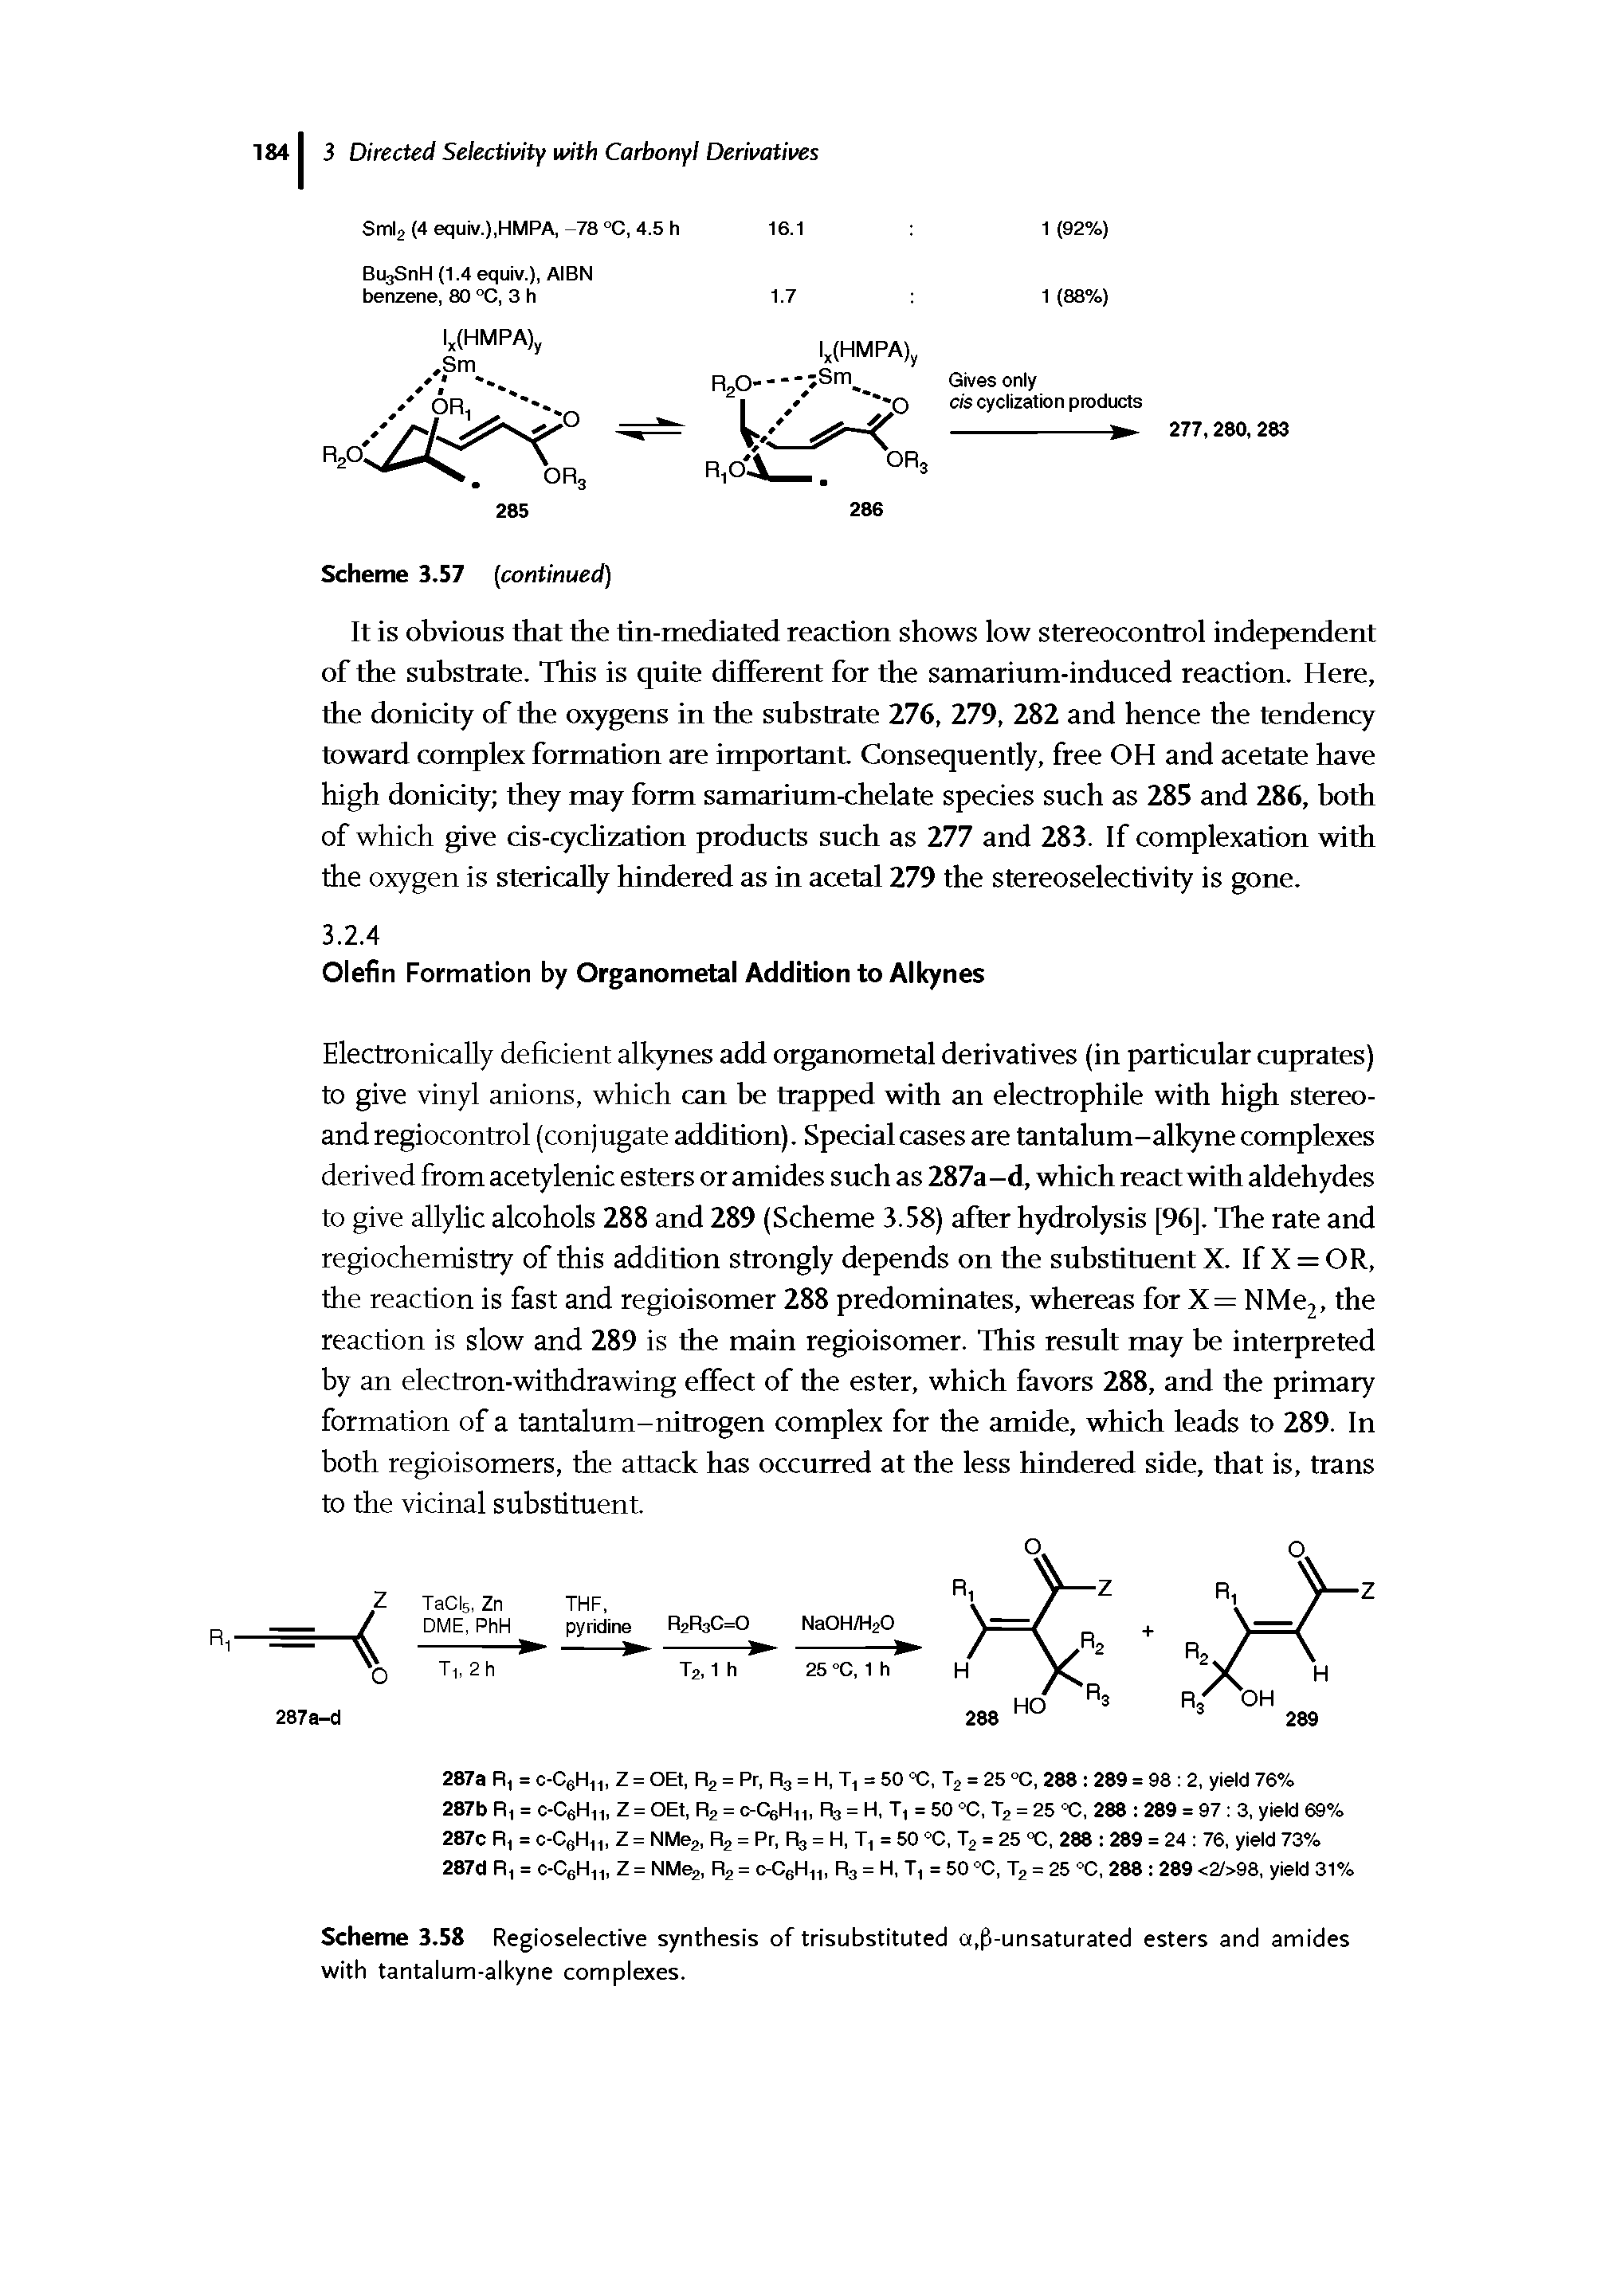 Scheme 3.58 Regioselective synthesis of trisubstituted a,(i-unsaturated esters and amides with tantalum-alkyne complexes.